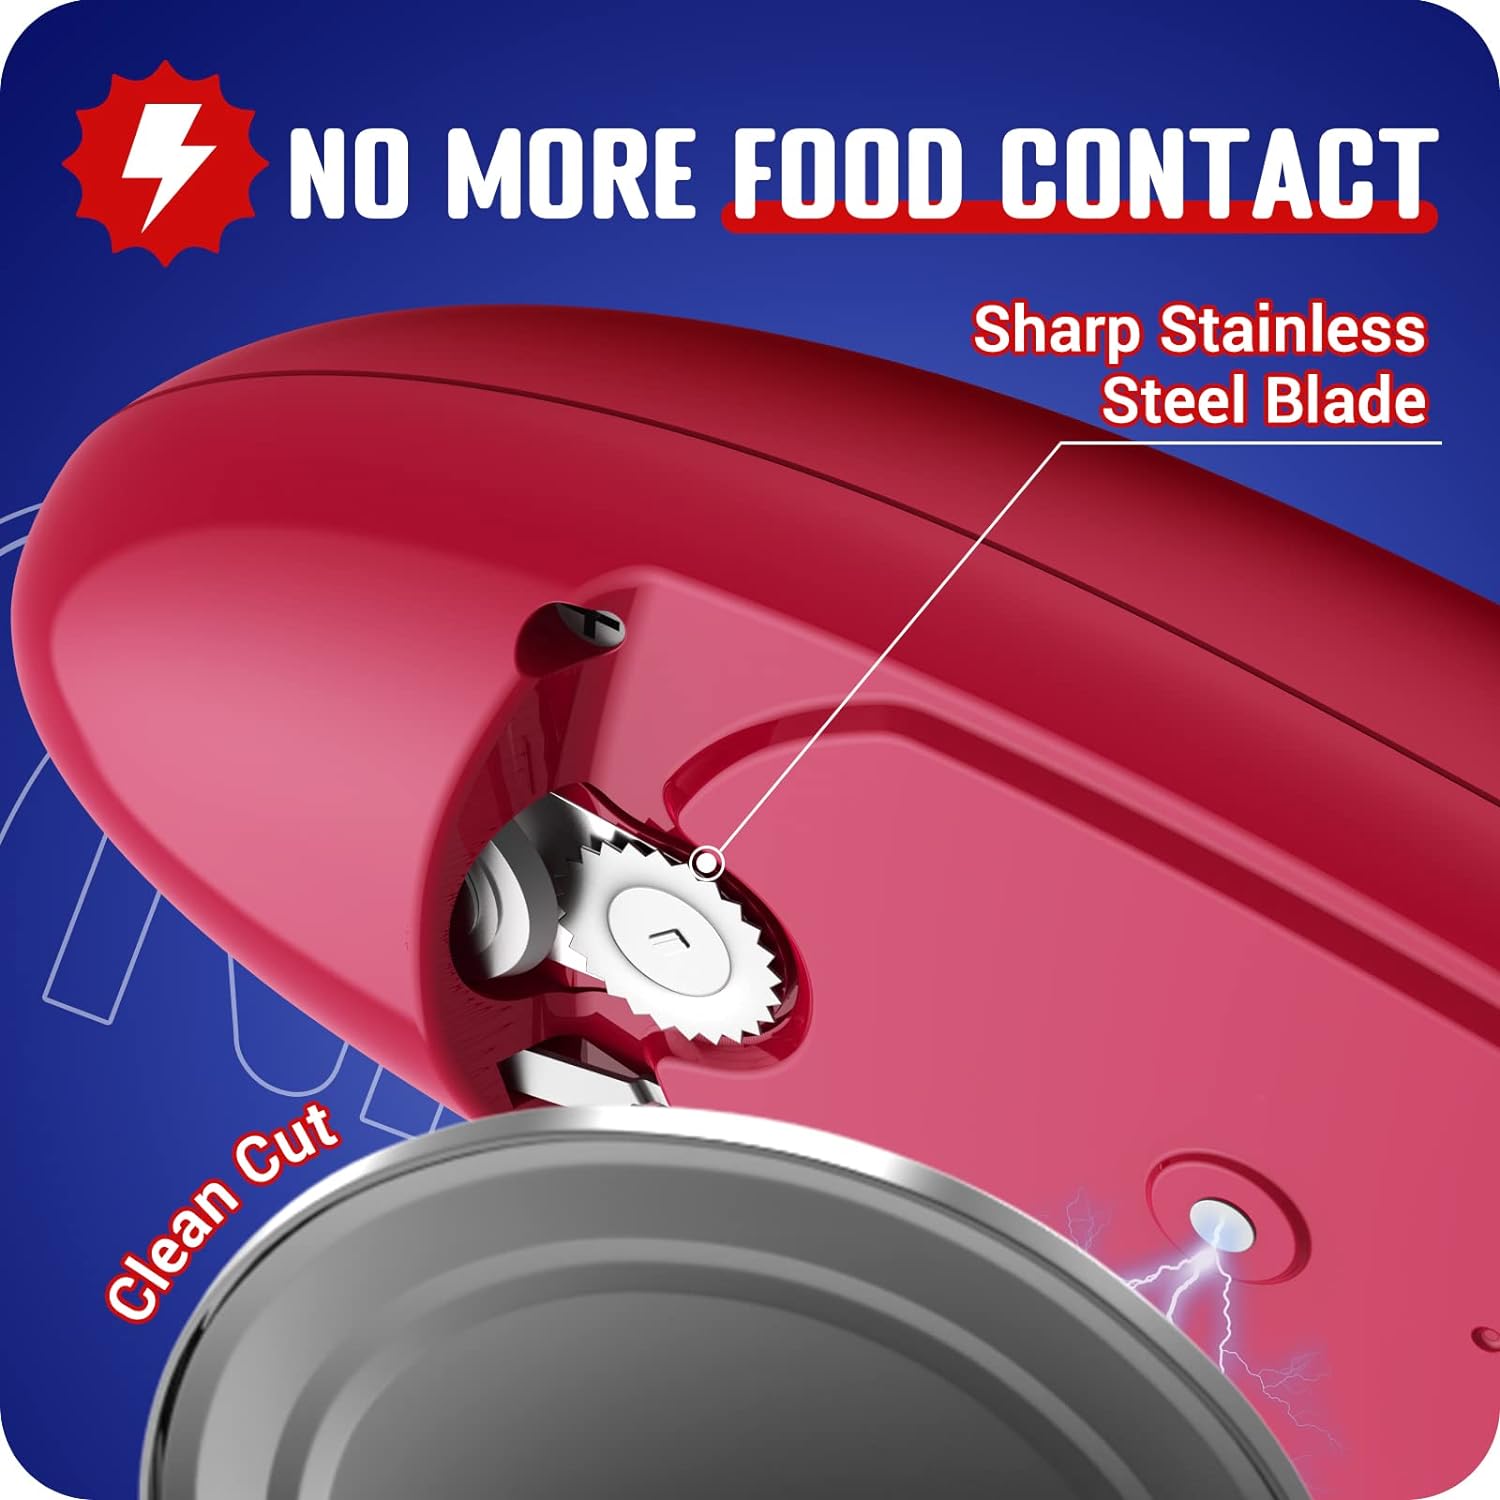 Electric Can Opener, Hand Free Can Opener Easy Open Any Can Sizes with Smooth Edge, Food-Safe Portable Battery Operated Electric Can Openers, Kitchen Gadget Gift for Kitchen, Seniors, Chef, Arthritis